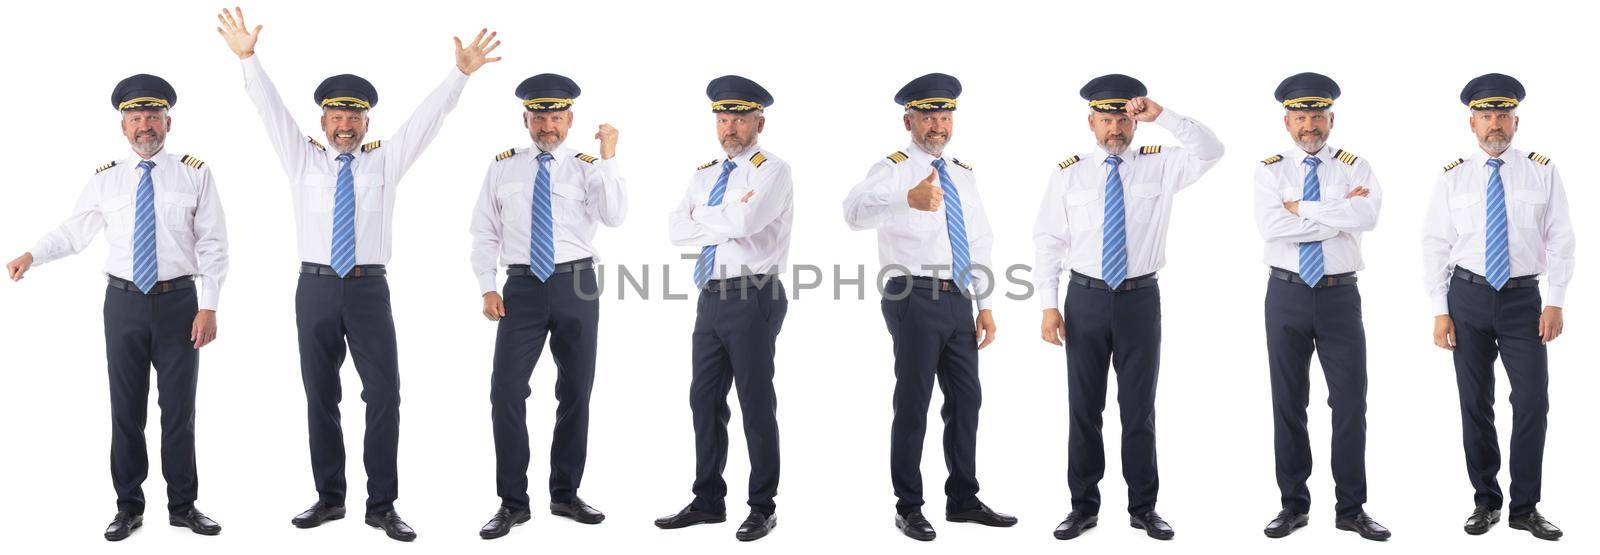 Airline pilot full length portraits by ALotOfPeople